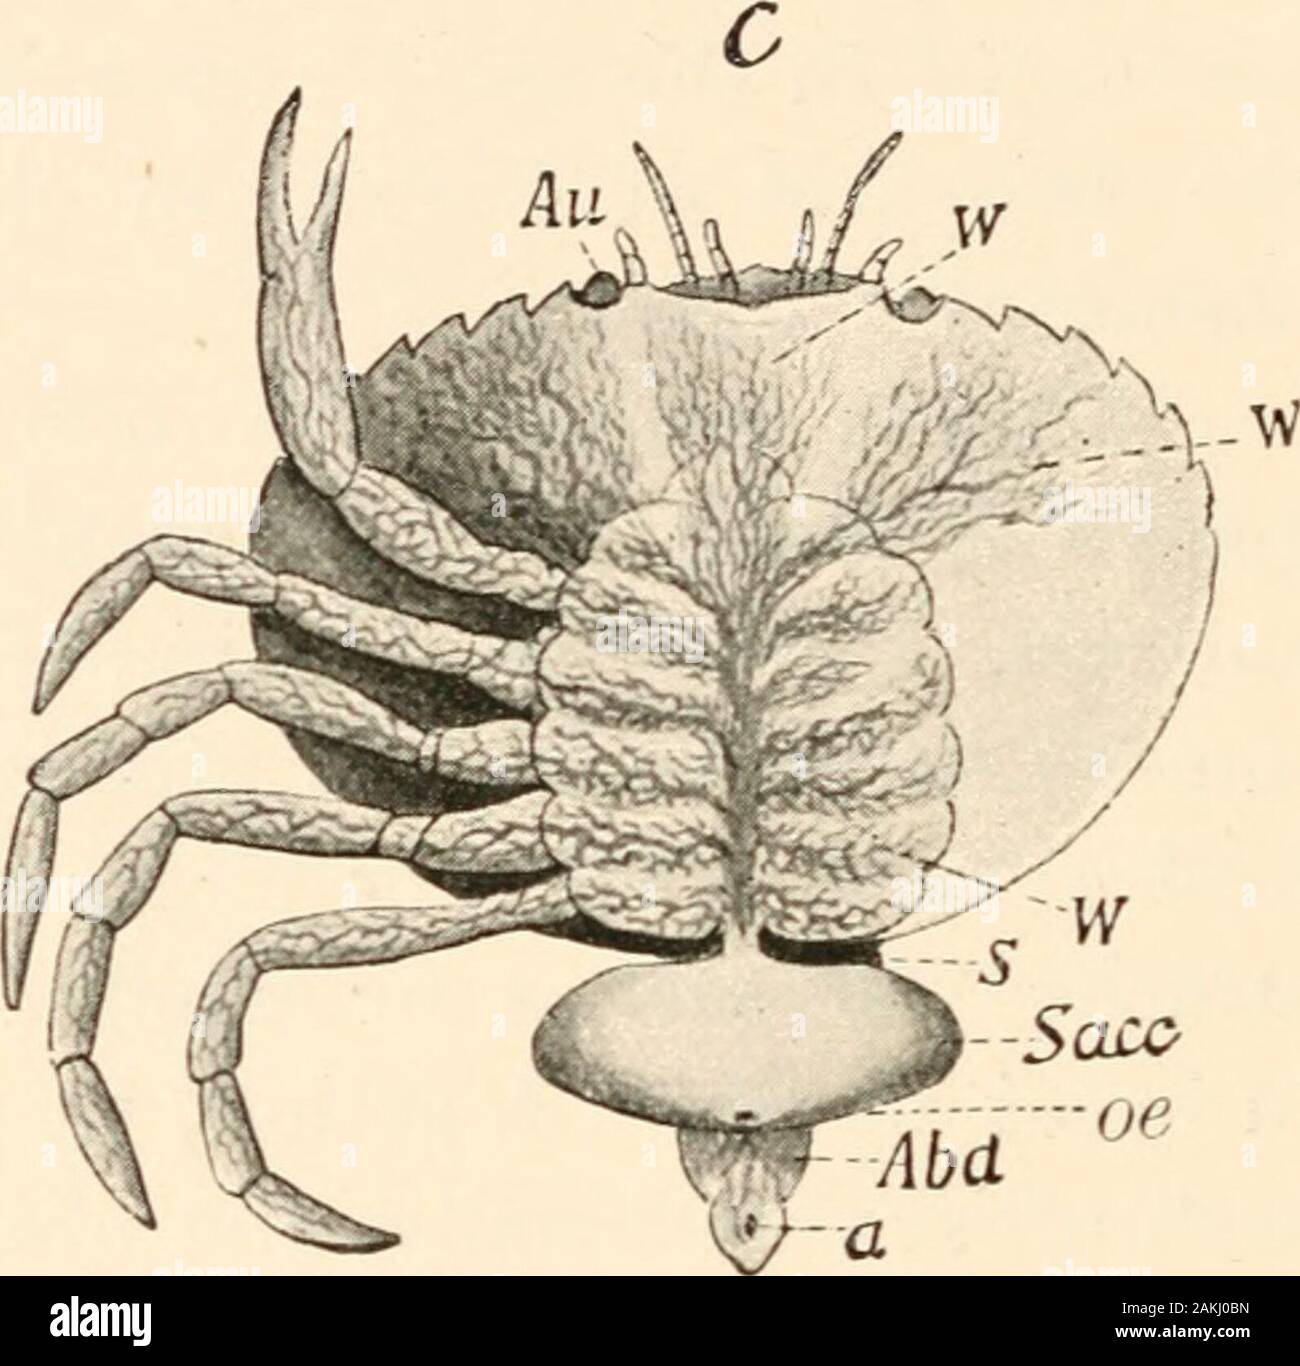 The evolution theory . Abd Fig. 112 (repeated). Development of the parasitic Crustacean Sacculinacarcini, after Delage. A, Nauplius stage. Au, eye, I, II, III, the three pairsof appendages. B, Cypris stage. VI-J^I, the swimming appendages. C, matureanimal {Sacc), attached to its host, the shore-crab {Carcinus mcenas), with afeltwork of fine root-processes enveloping the crabs viscera. S, stalk. Sacc, bodyof the parasite, oe, aperture of the brood-cavity. AM, abdomen of the crabwith the anus (a). that when we inquire into the whole story, and appreciate thedifficulties associated with the persi Stock Photo